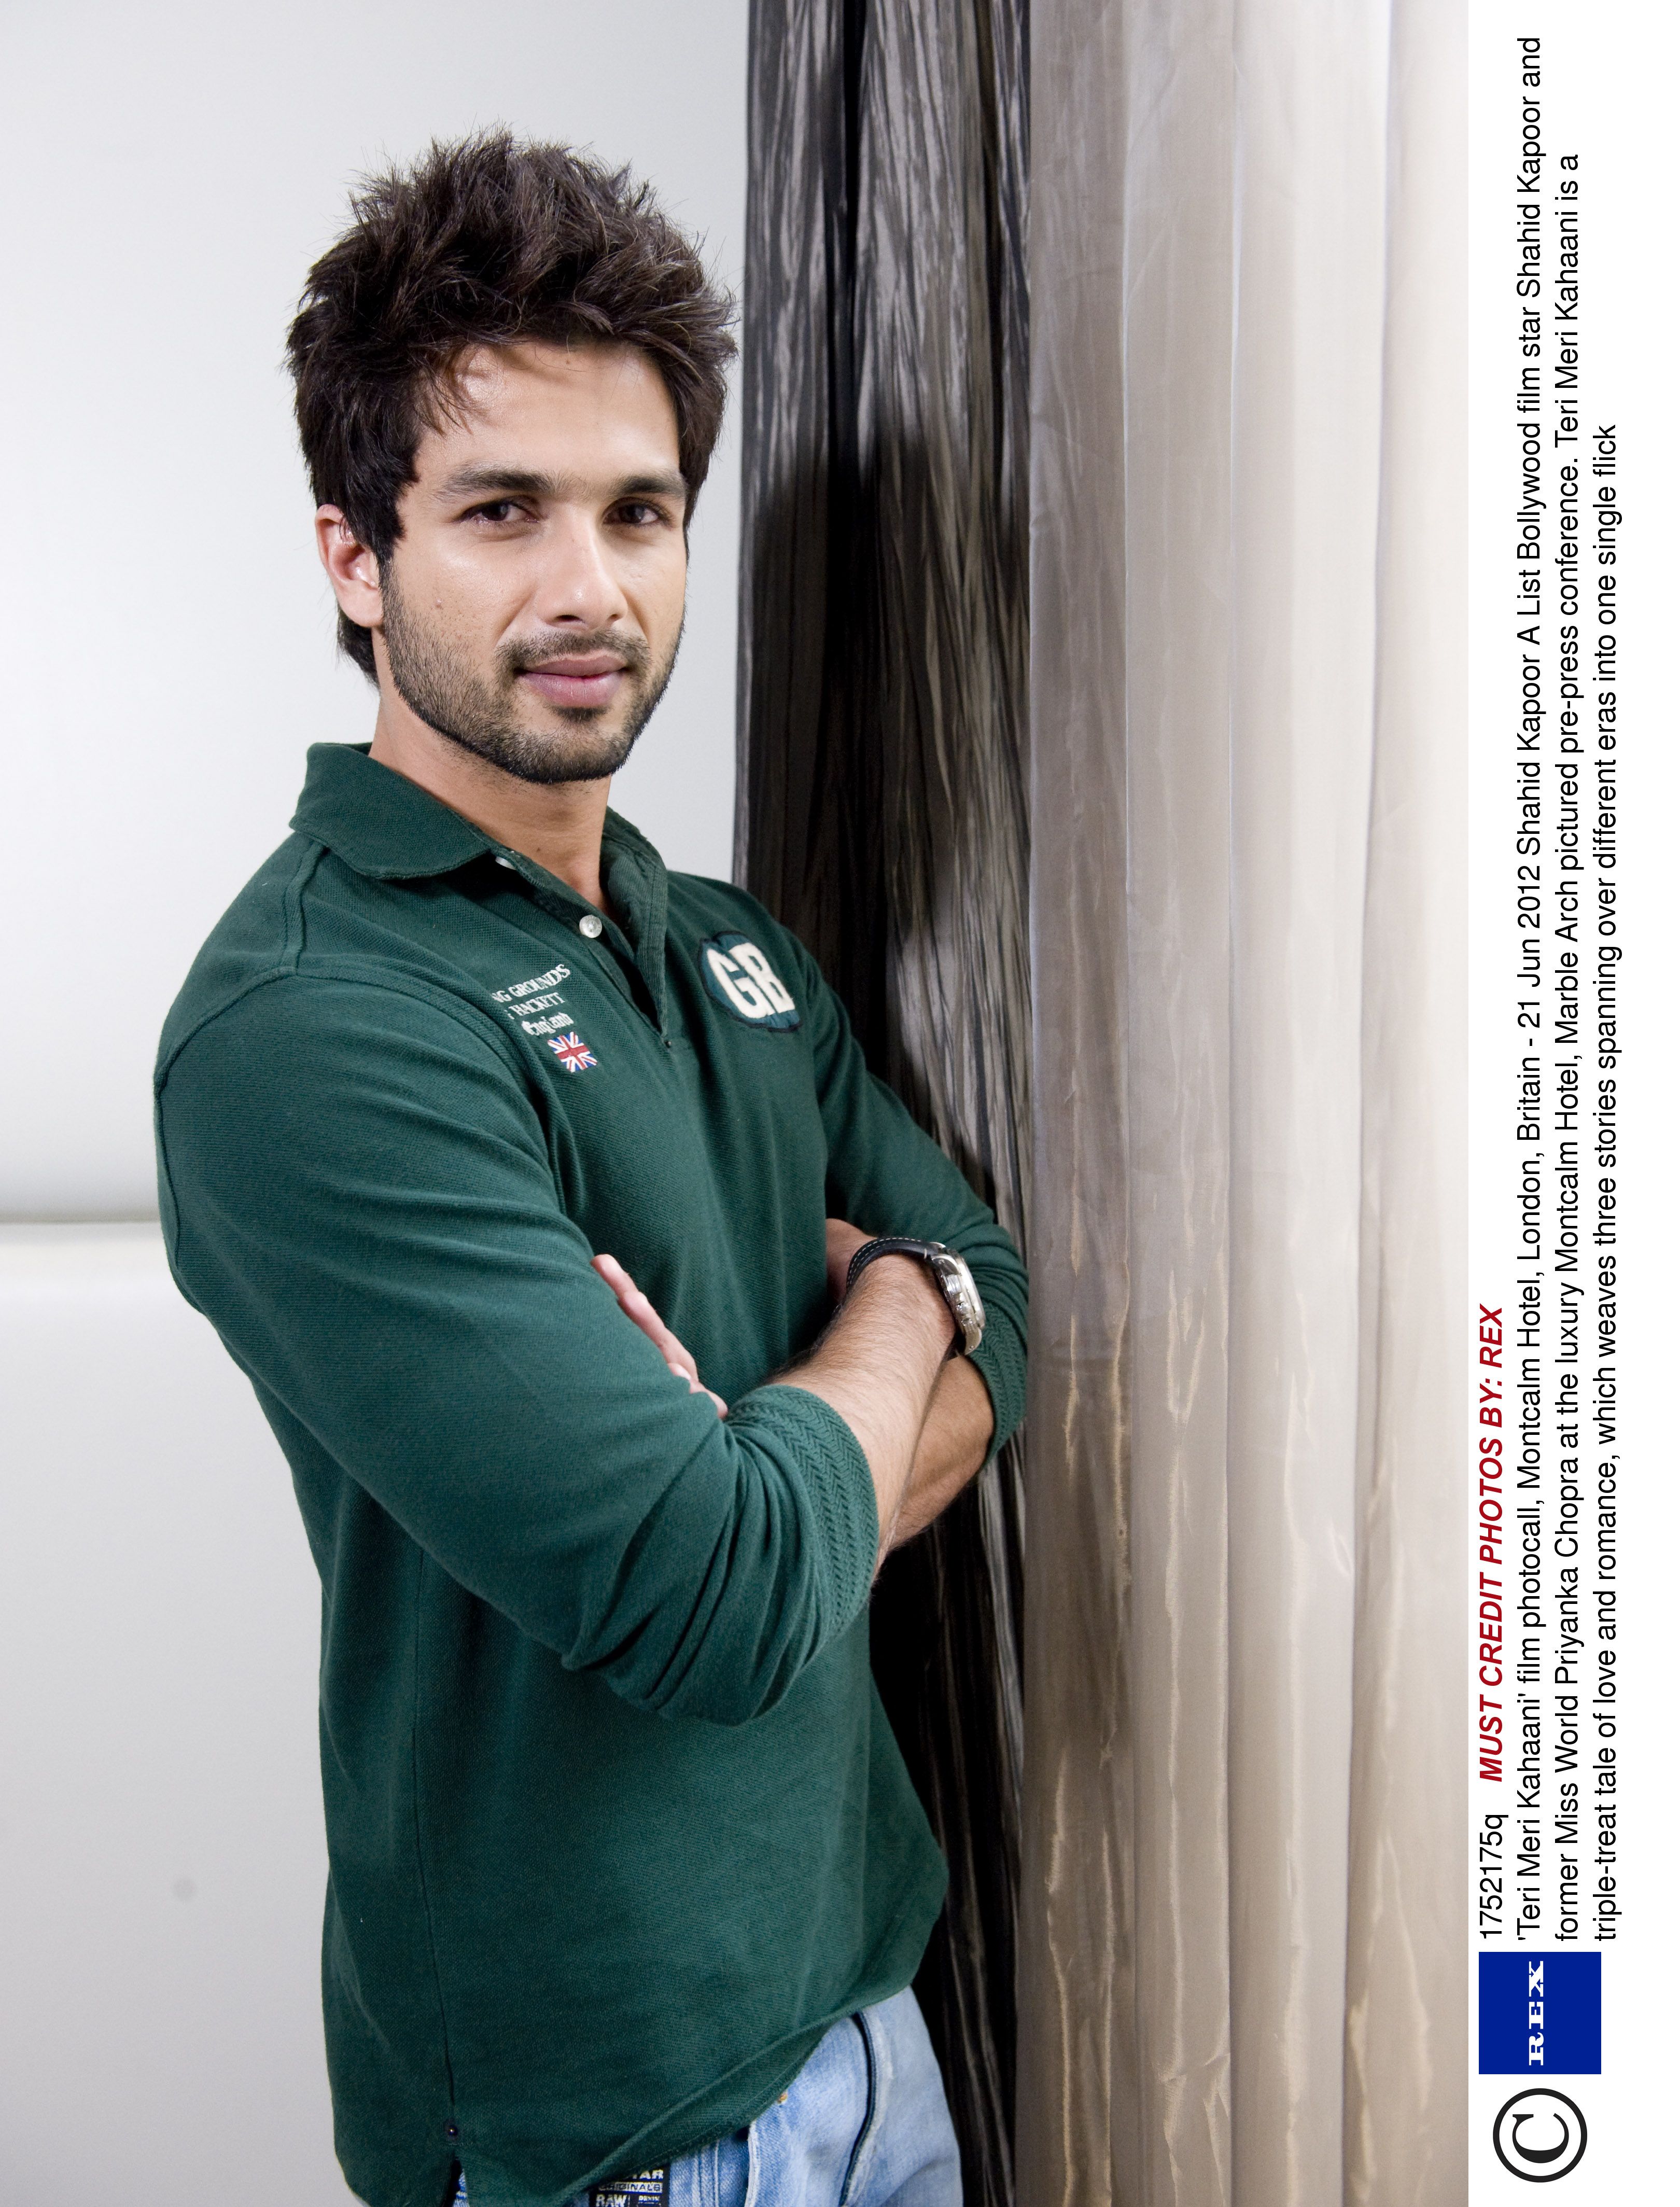 The Sims Resource - Shahid Kapoor